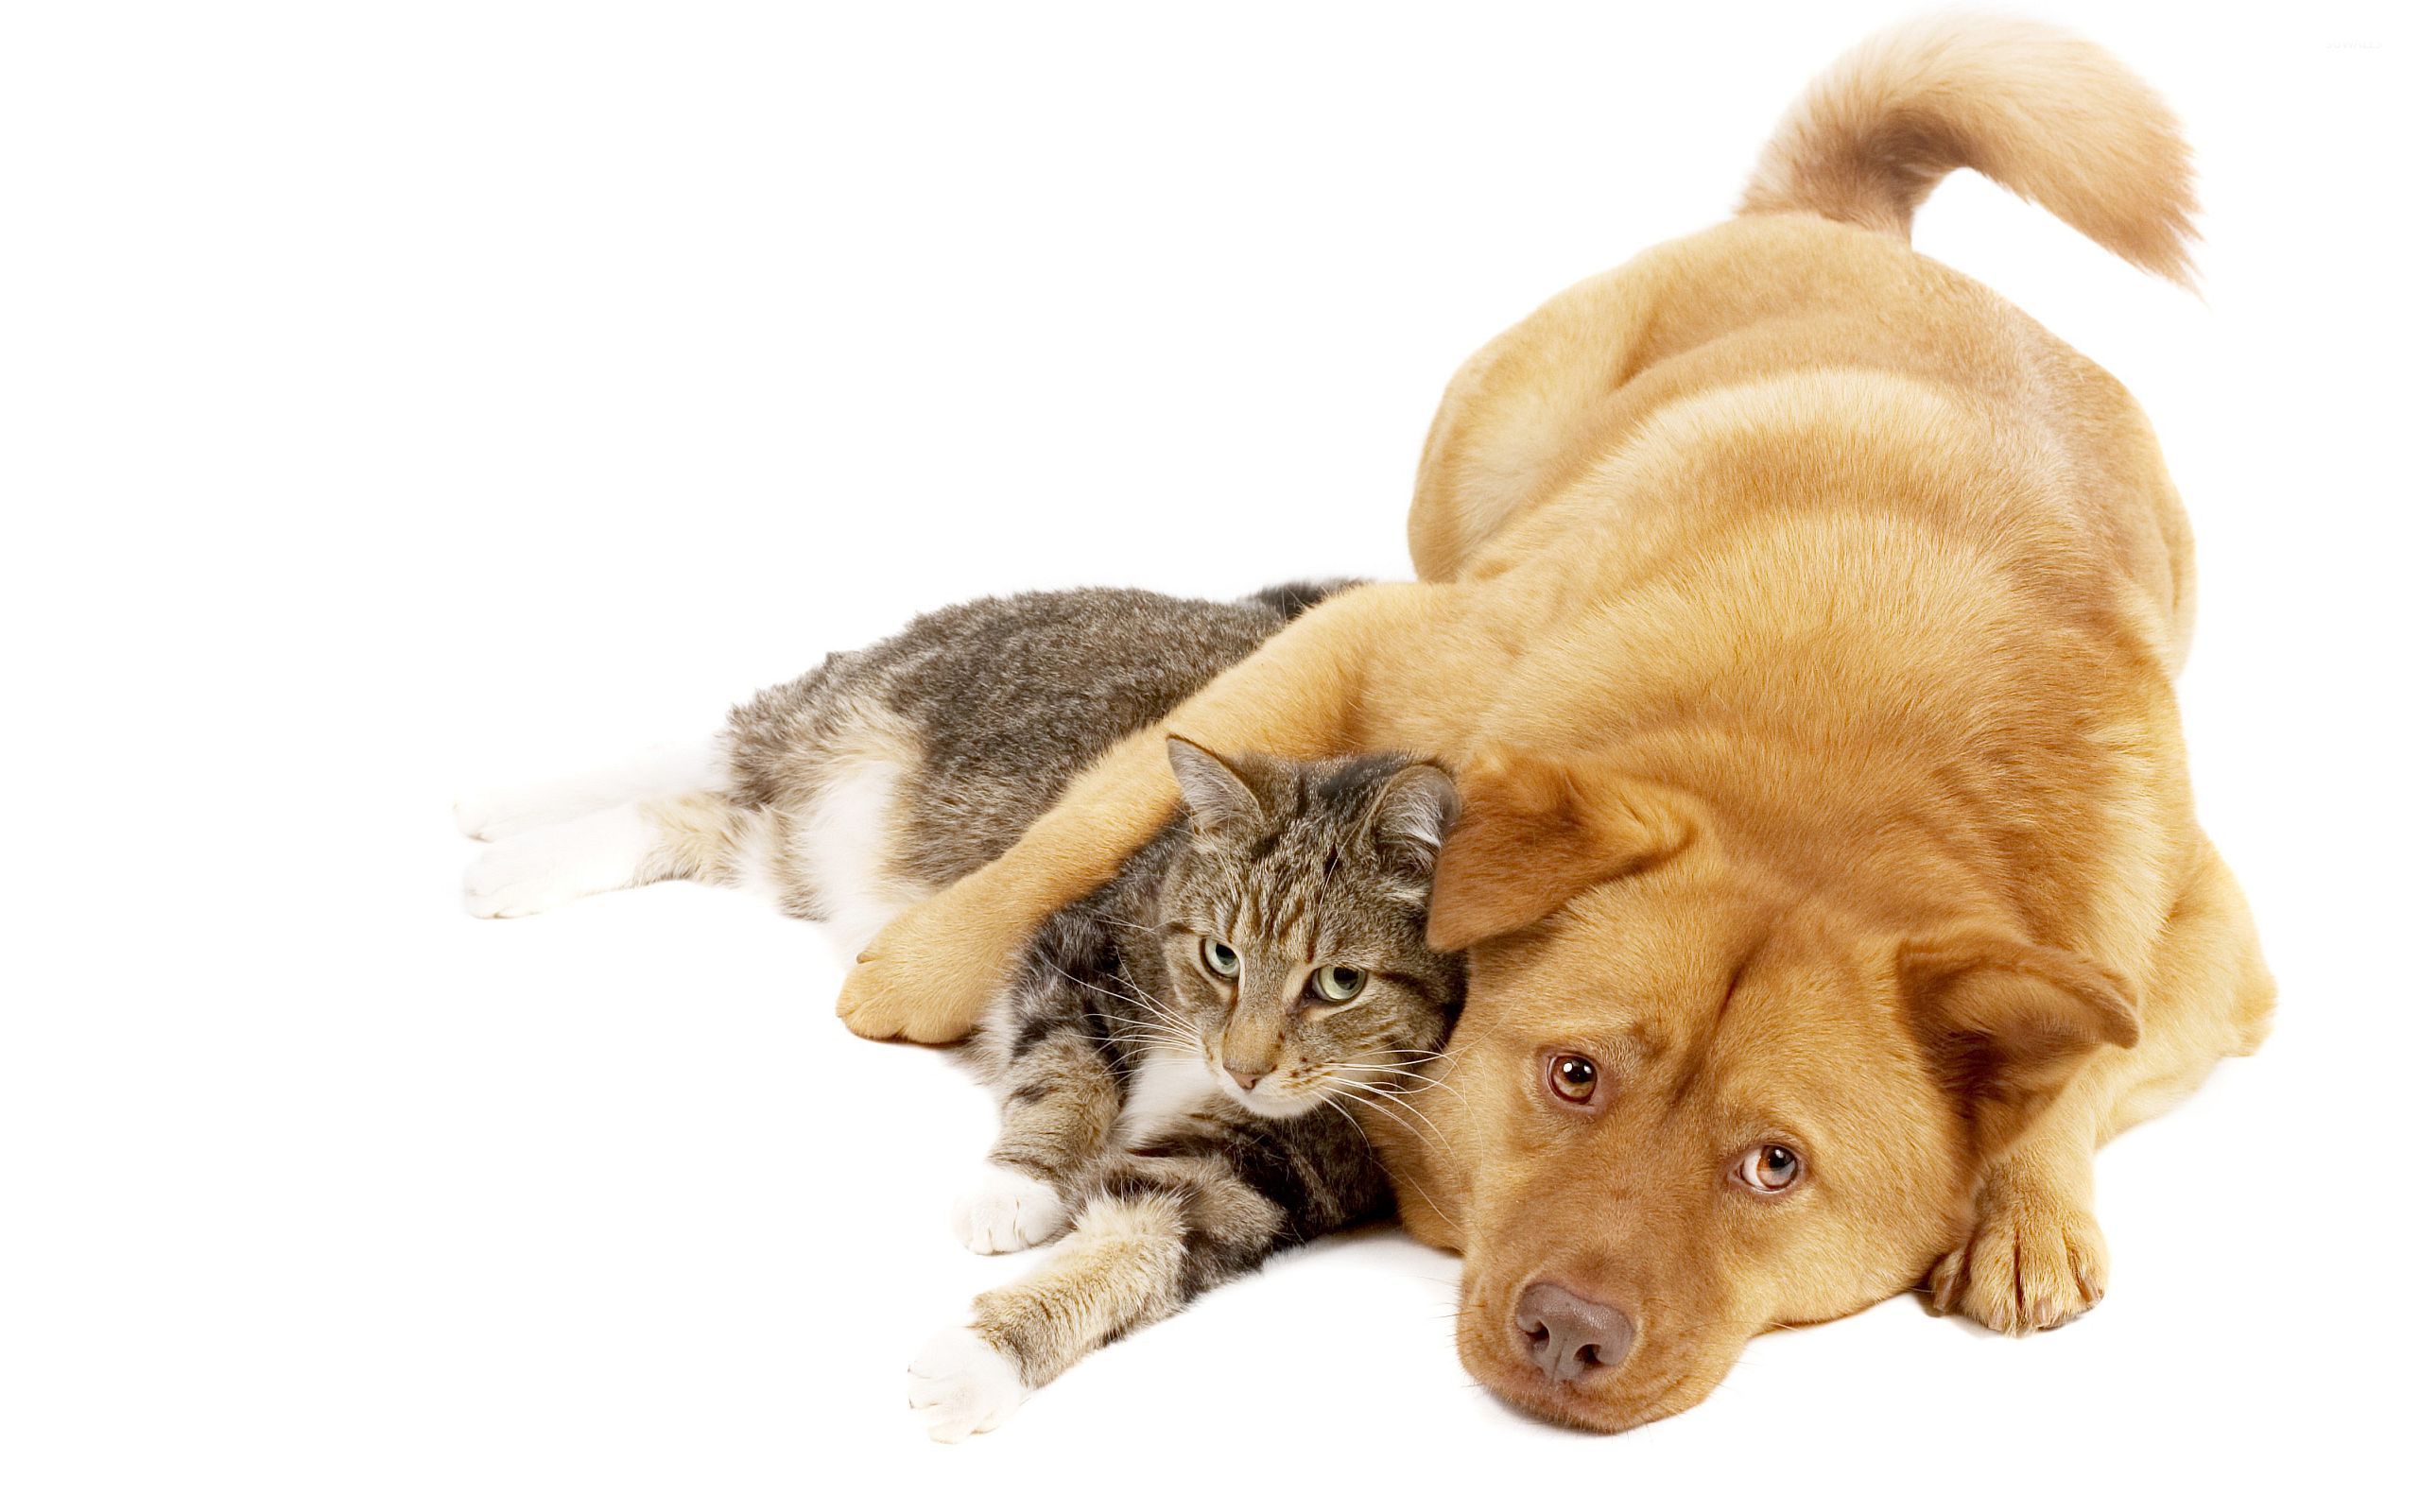 Cat And Dog Wallpaper Image Crazy Gallery